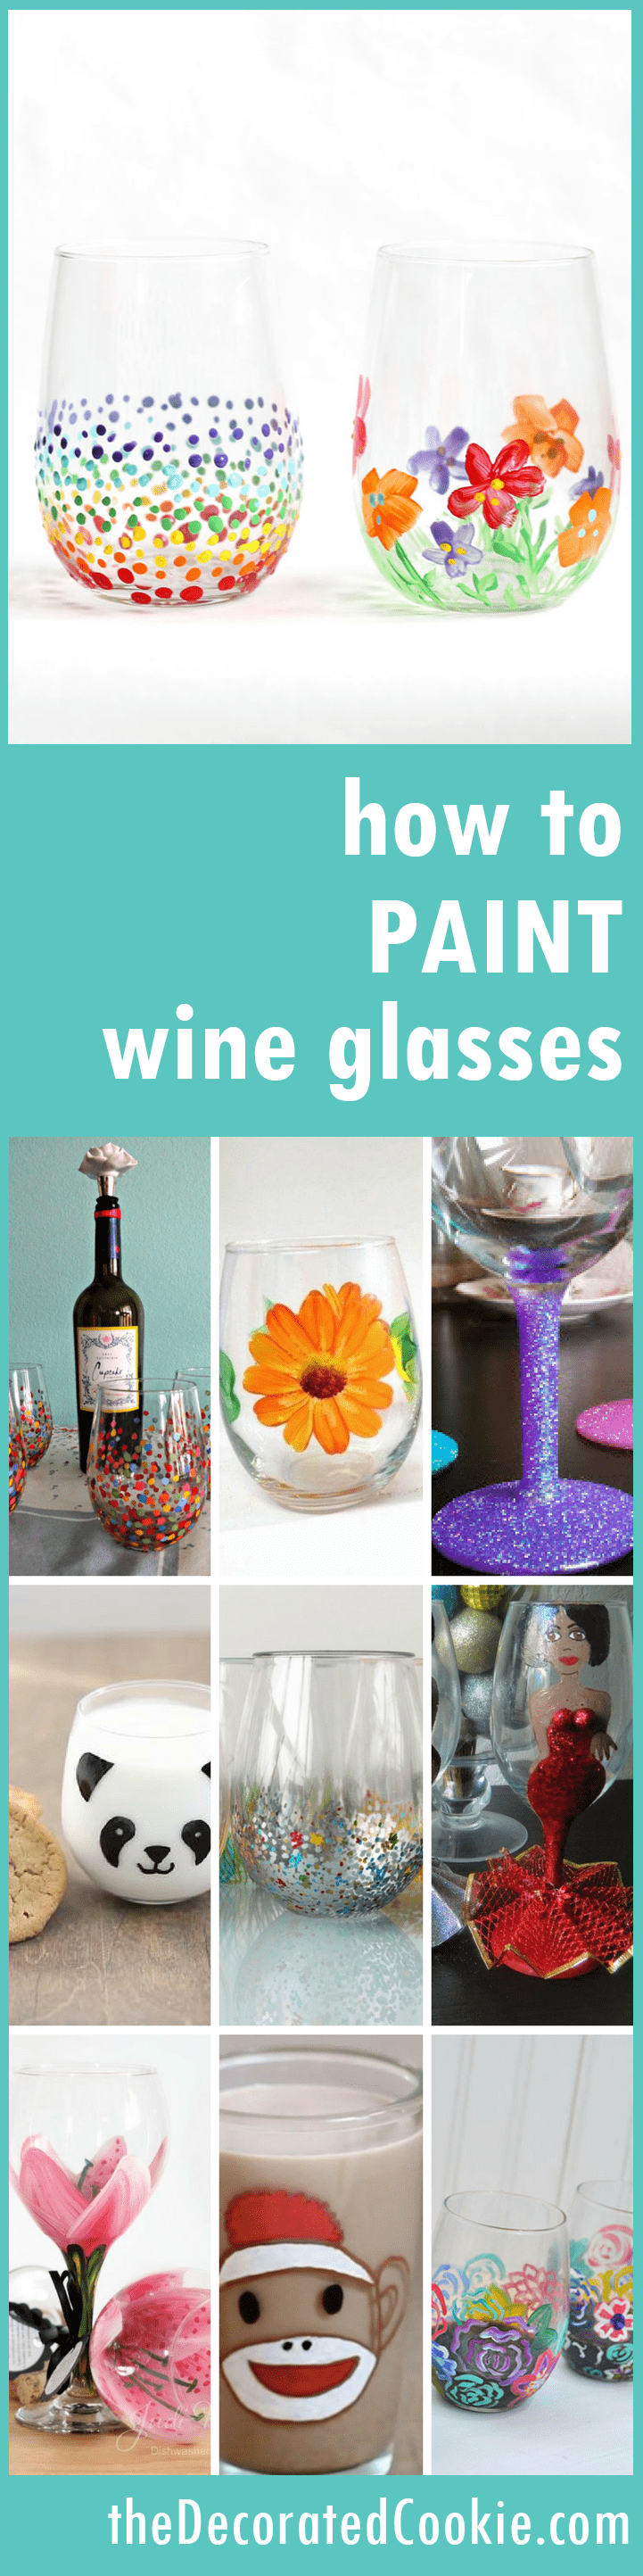 how to paint on wine glasses 